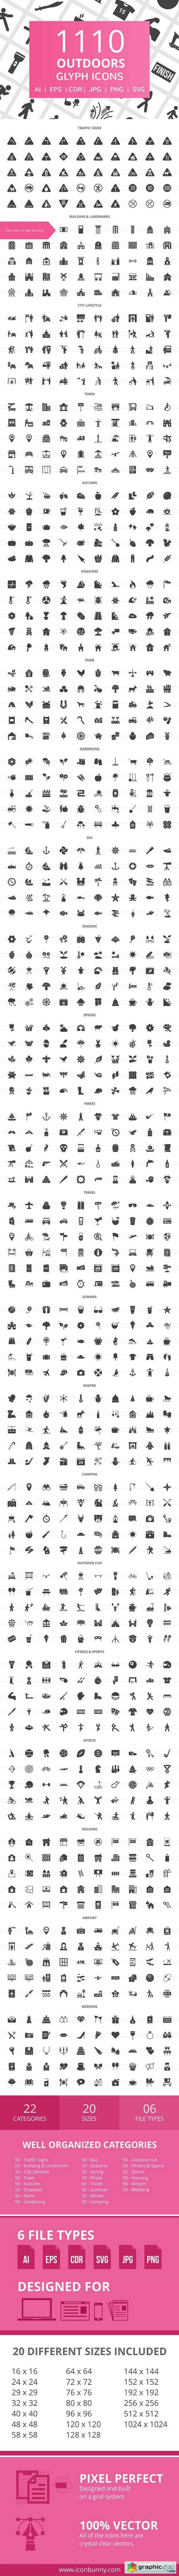 1110 Outdoors Glyph Icons